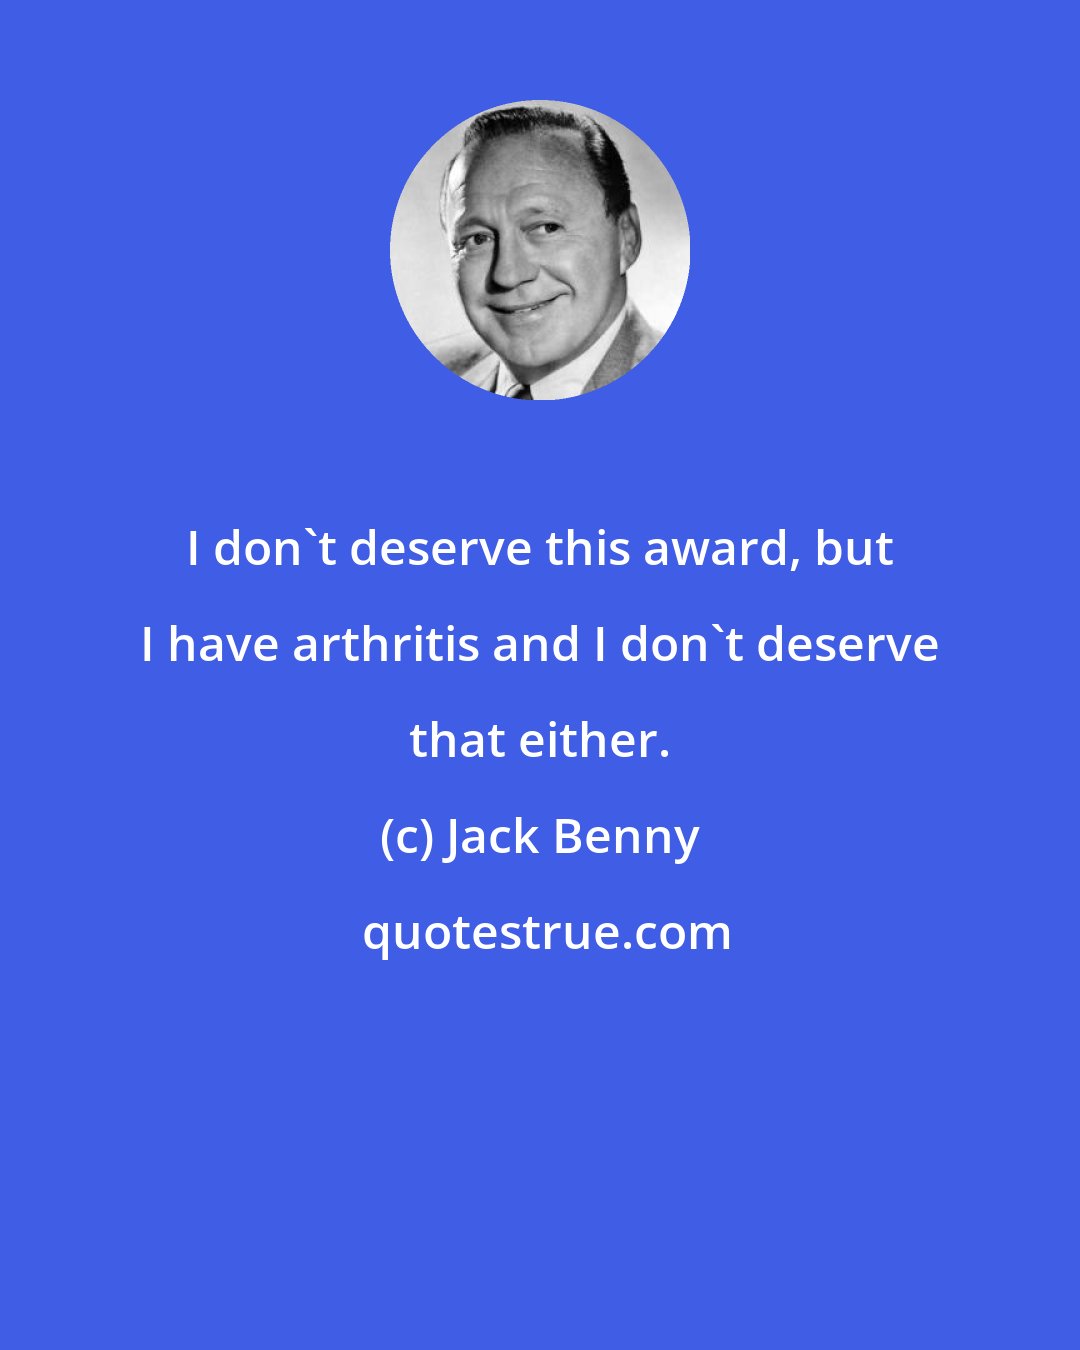 Jack Benny: I don't deserve this award, but I have arthritis and I don't deserve that either.